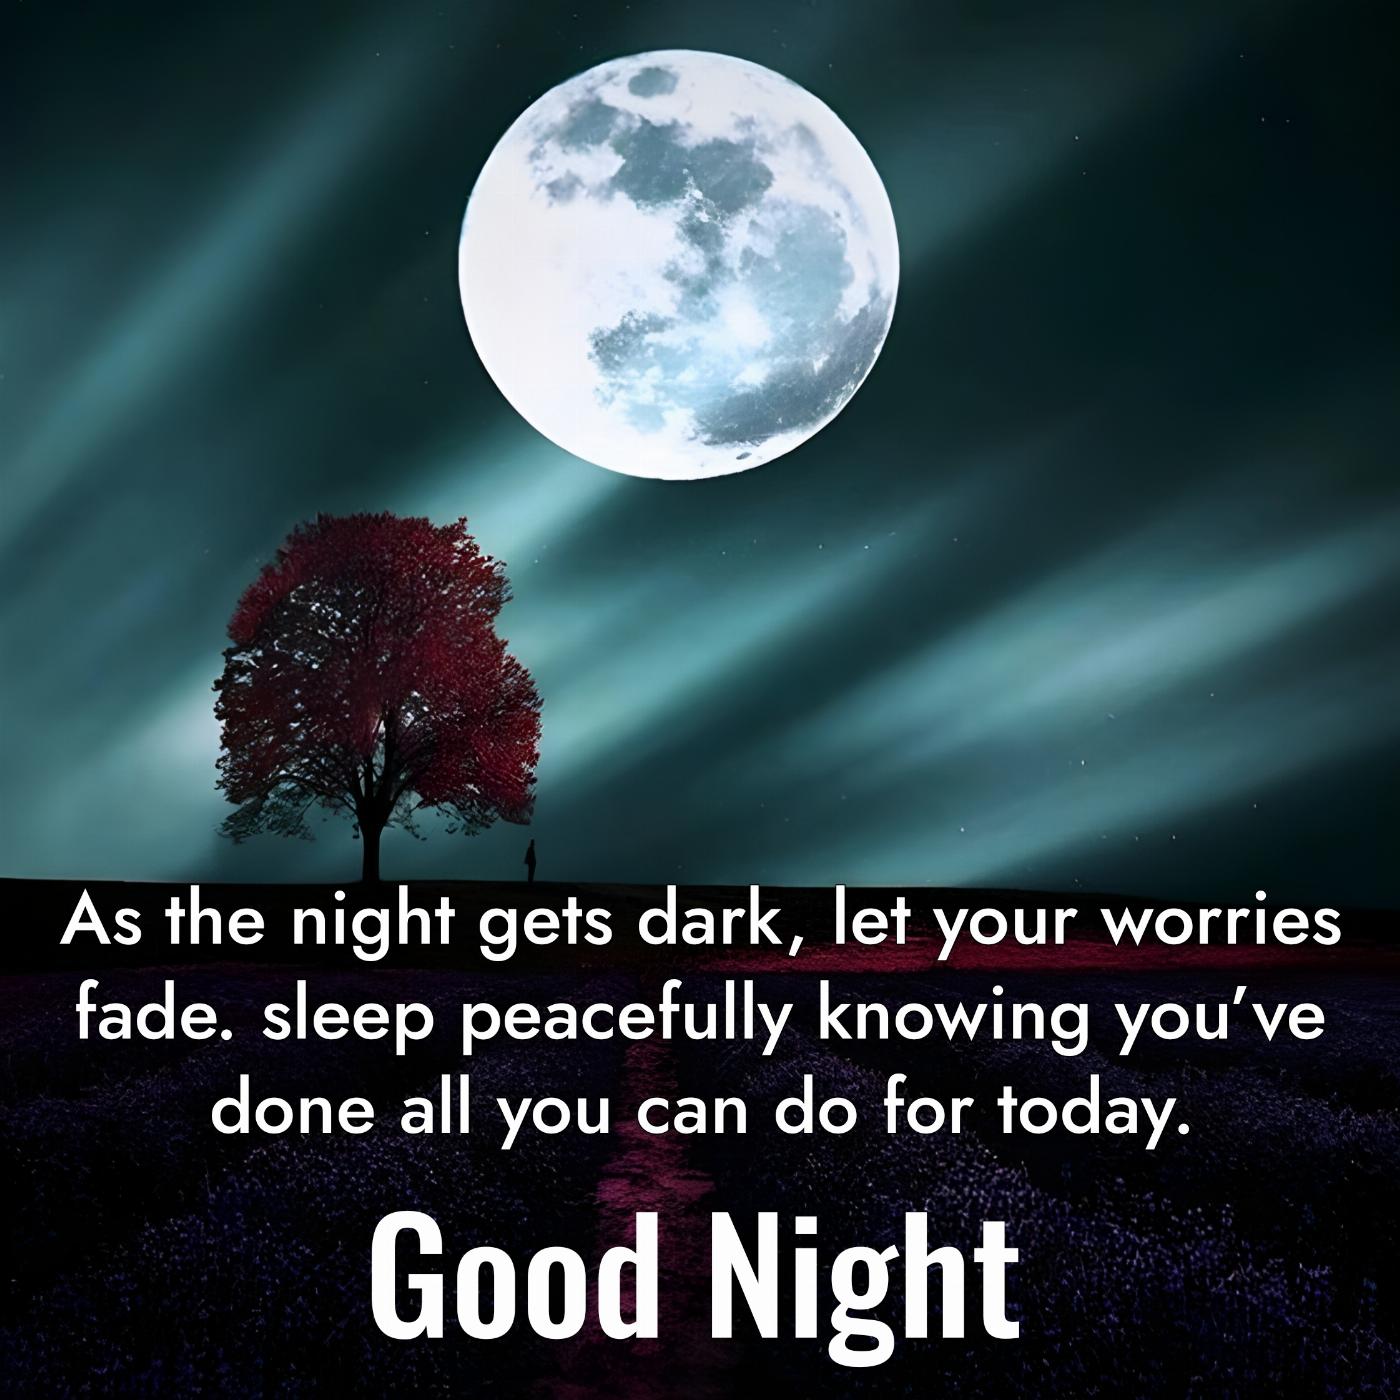 As the night gets dark let your worries fade